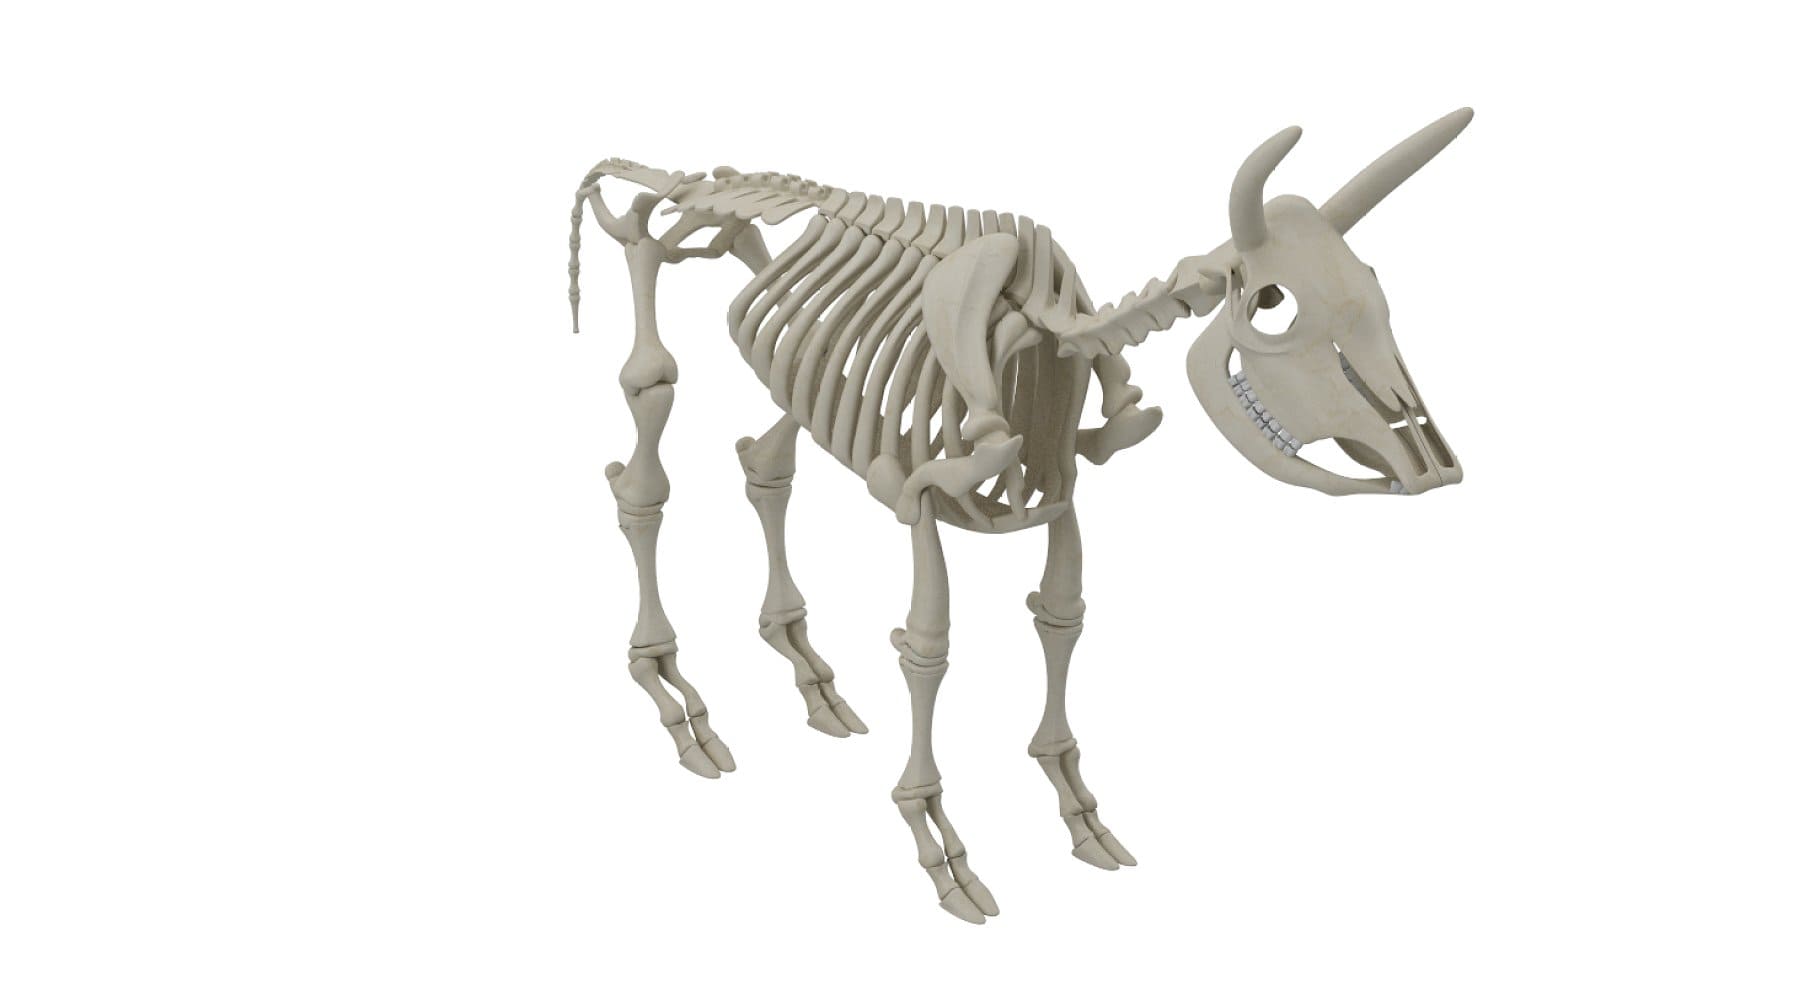 Cattle skeleton mockup with white teeth.